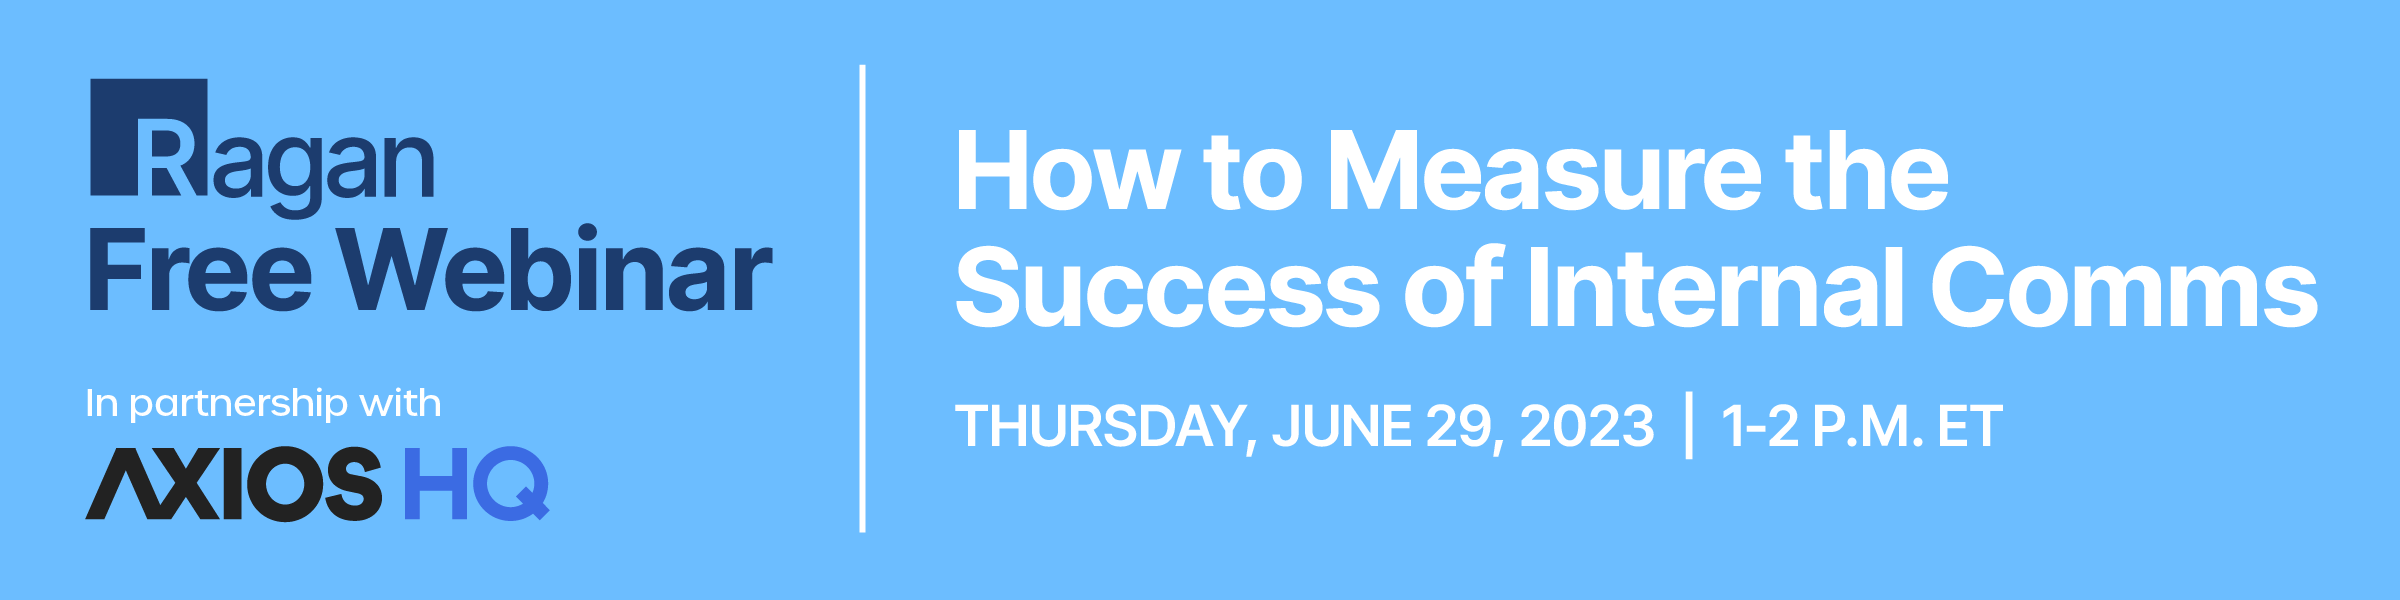 Presentation Handouts For: Y23FWSP29062023 -  How to Measure the Success of Internal Comms